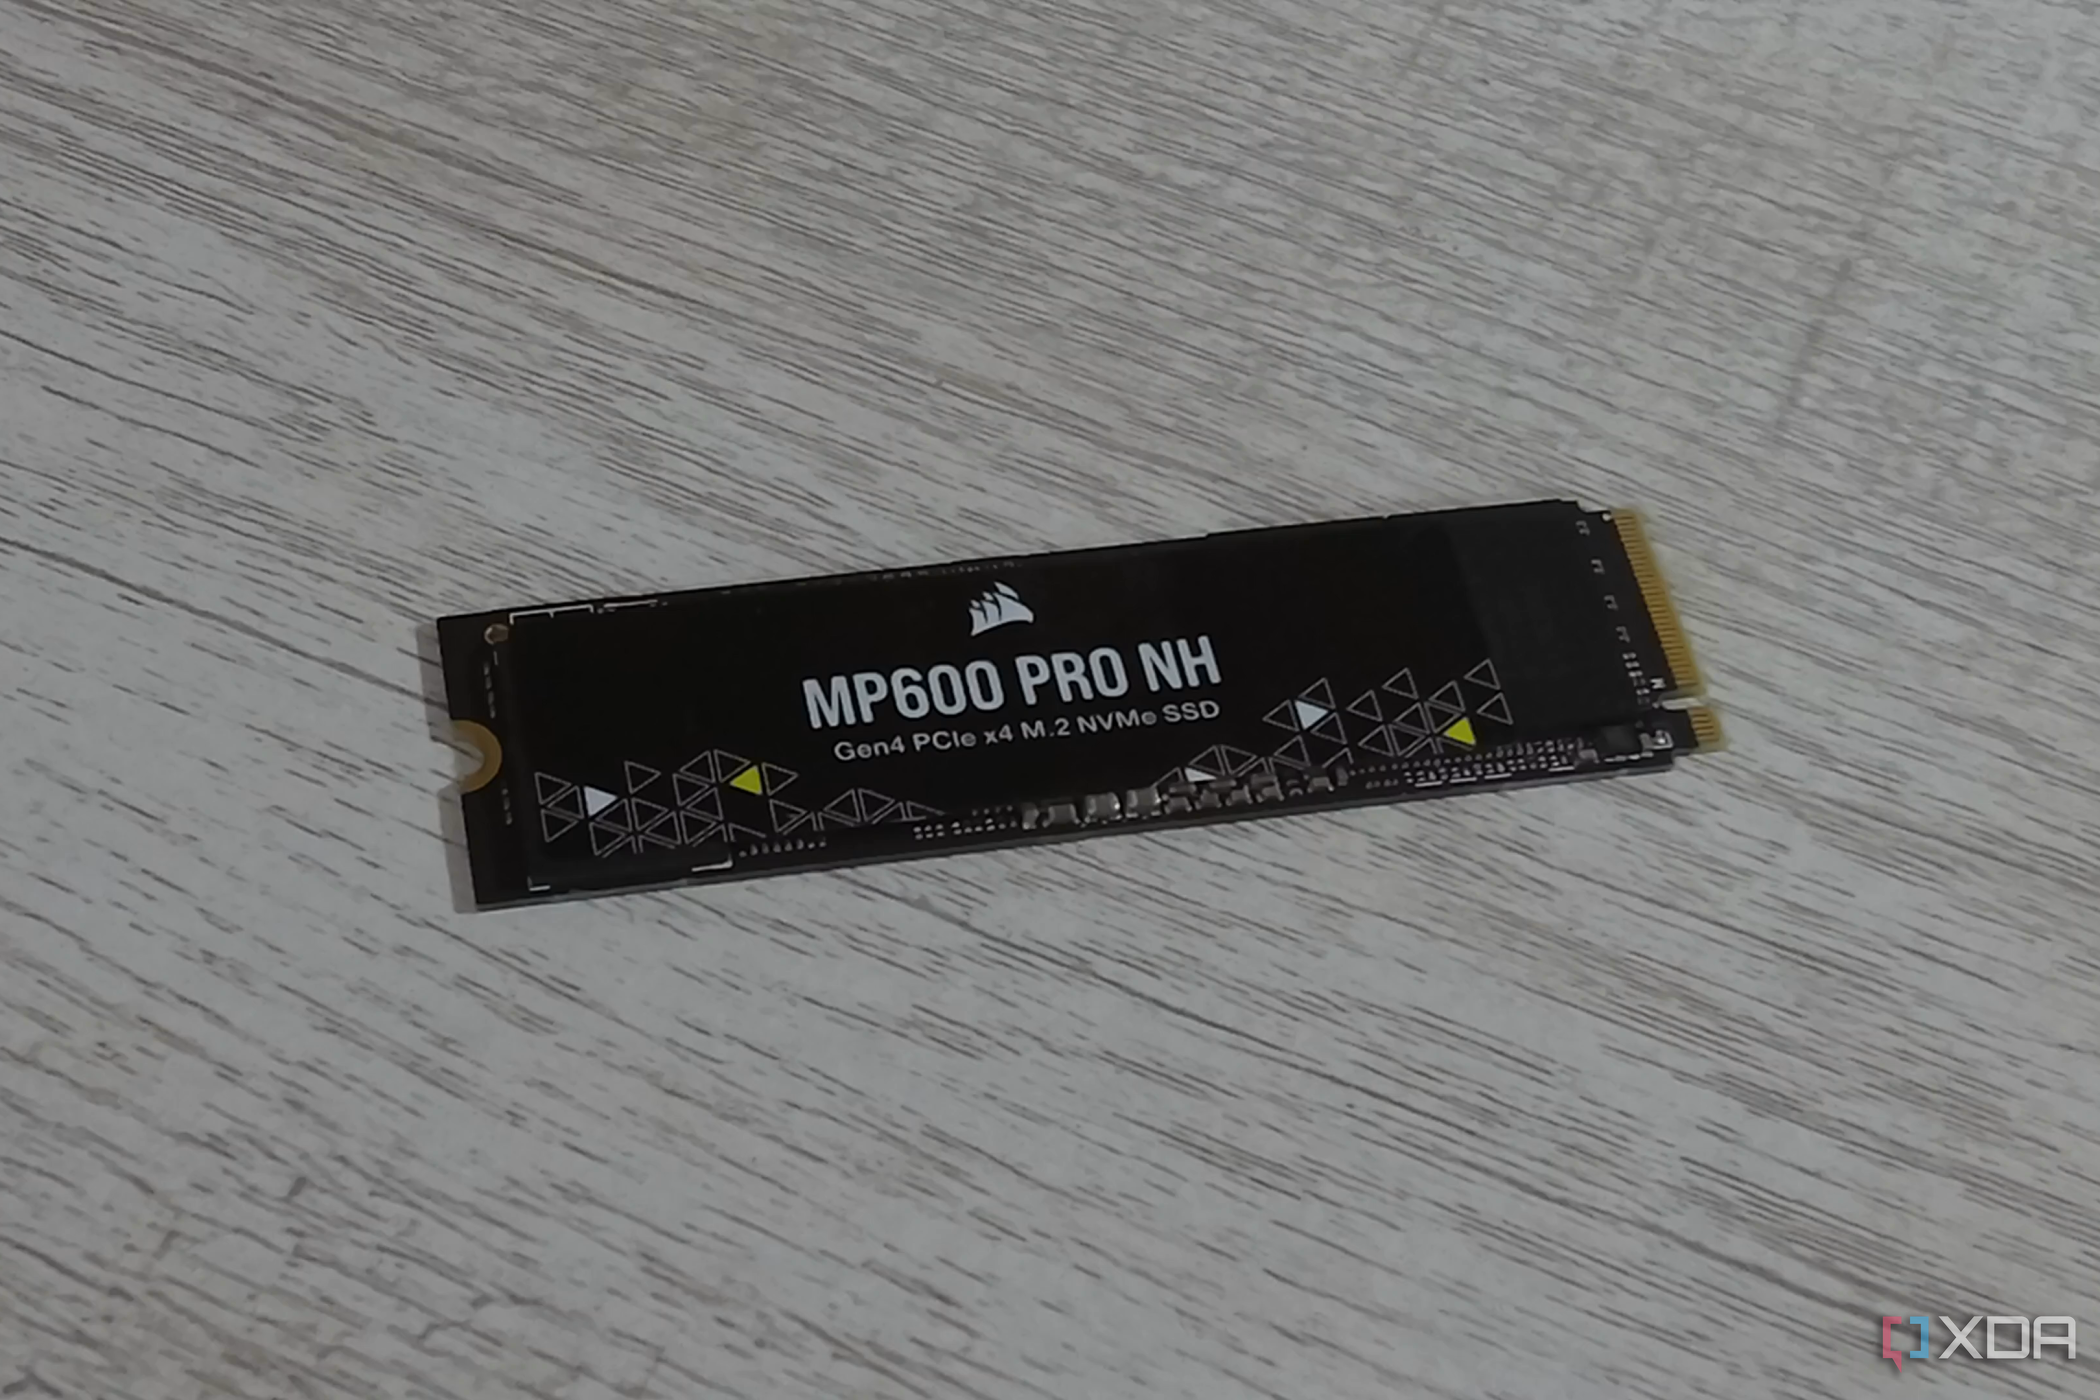 Corsair MP600 Pro NH review: Dethroning the 990 Pro as the fastest PCIe 4.0 SSD